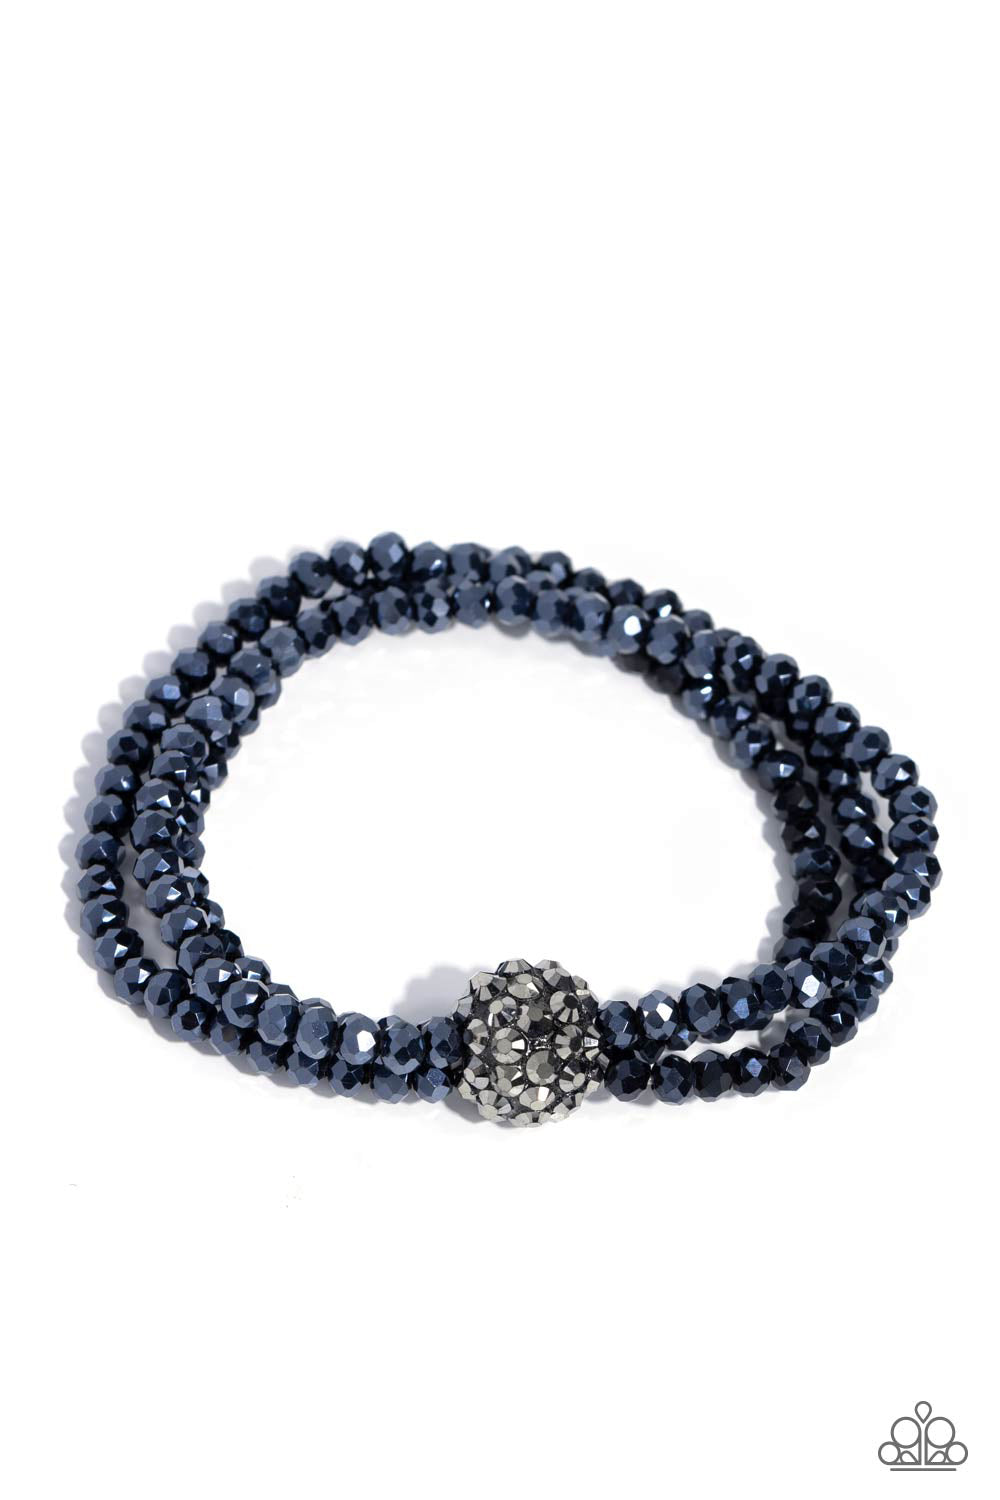 Twisted Theme Blue Stretch Bracelet - Paparazzi Accessories  Featuring faceted finishes, blue beads are threaded along three stretchy bands around the wrist. Encrusted in gunmetal spiky-like details, an oversized ball twists at the center of the wrist for a fierce industrial statement.  Sold as one individual bracelet.  P9RE-BLXX-247XX